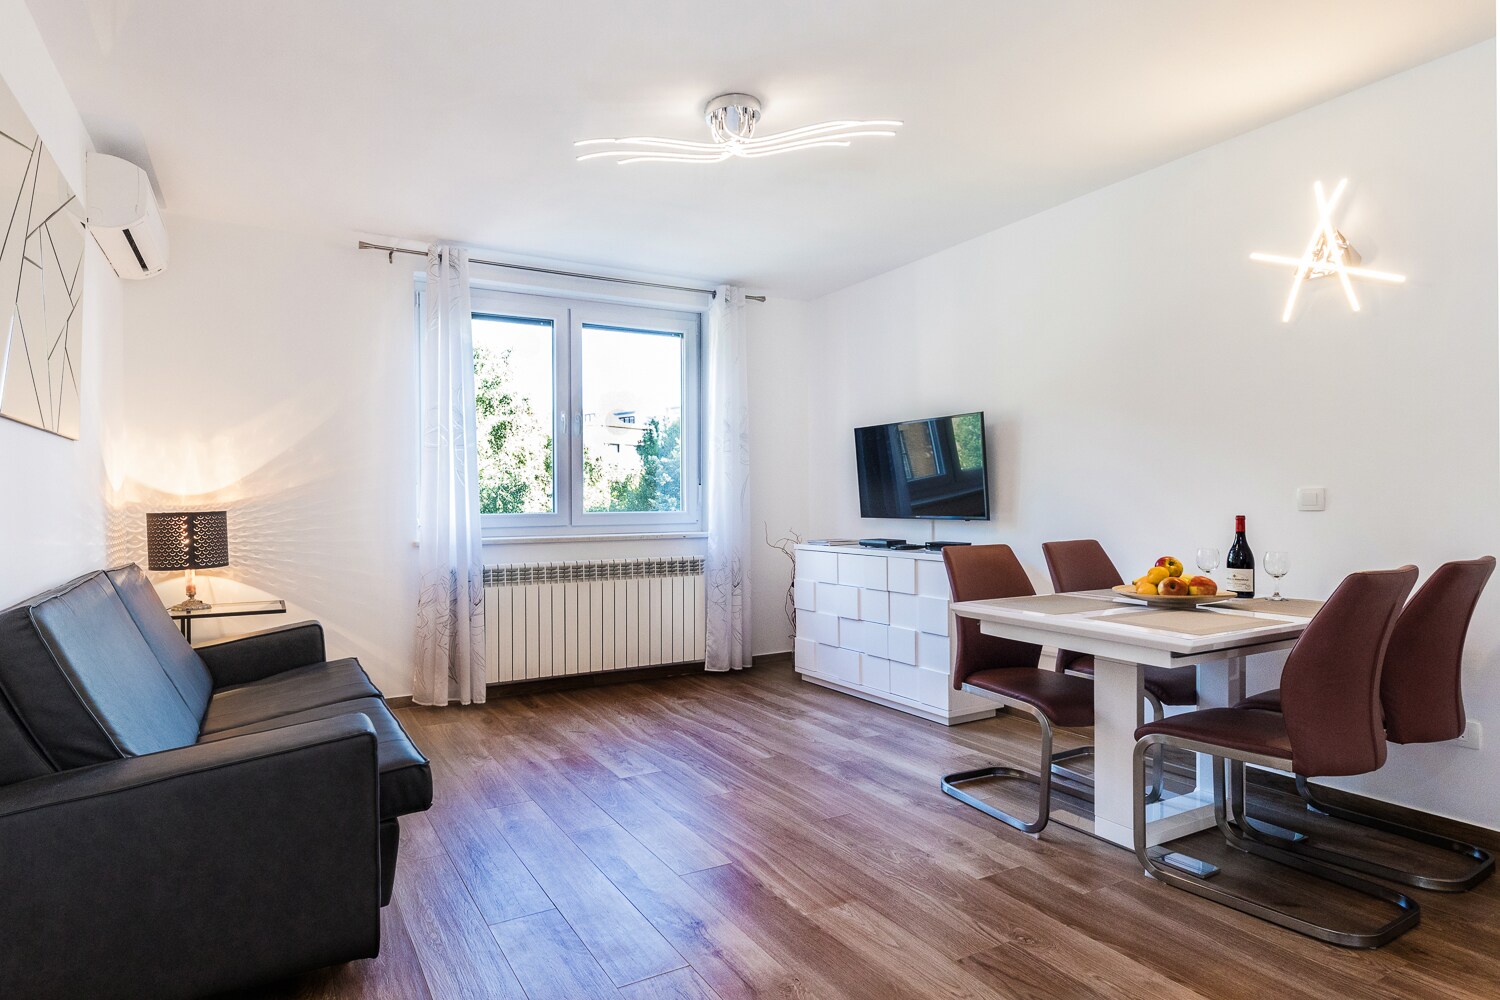 Our spacious and bright two-bedroom apartment located near the heart of the city center